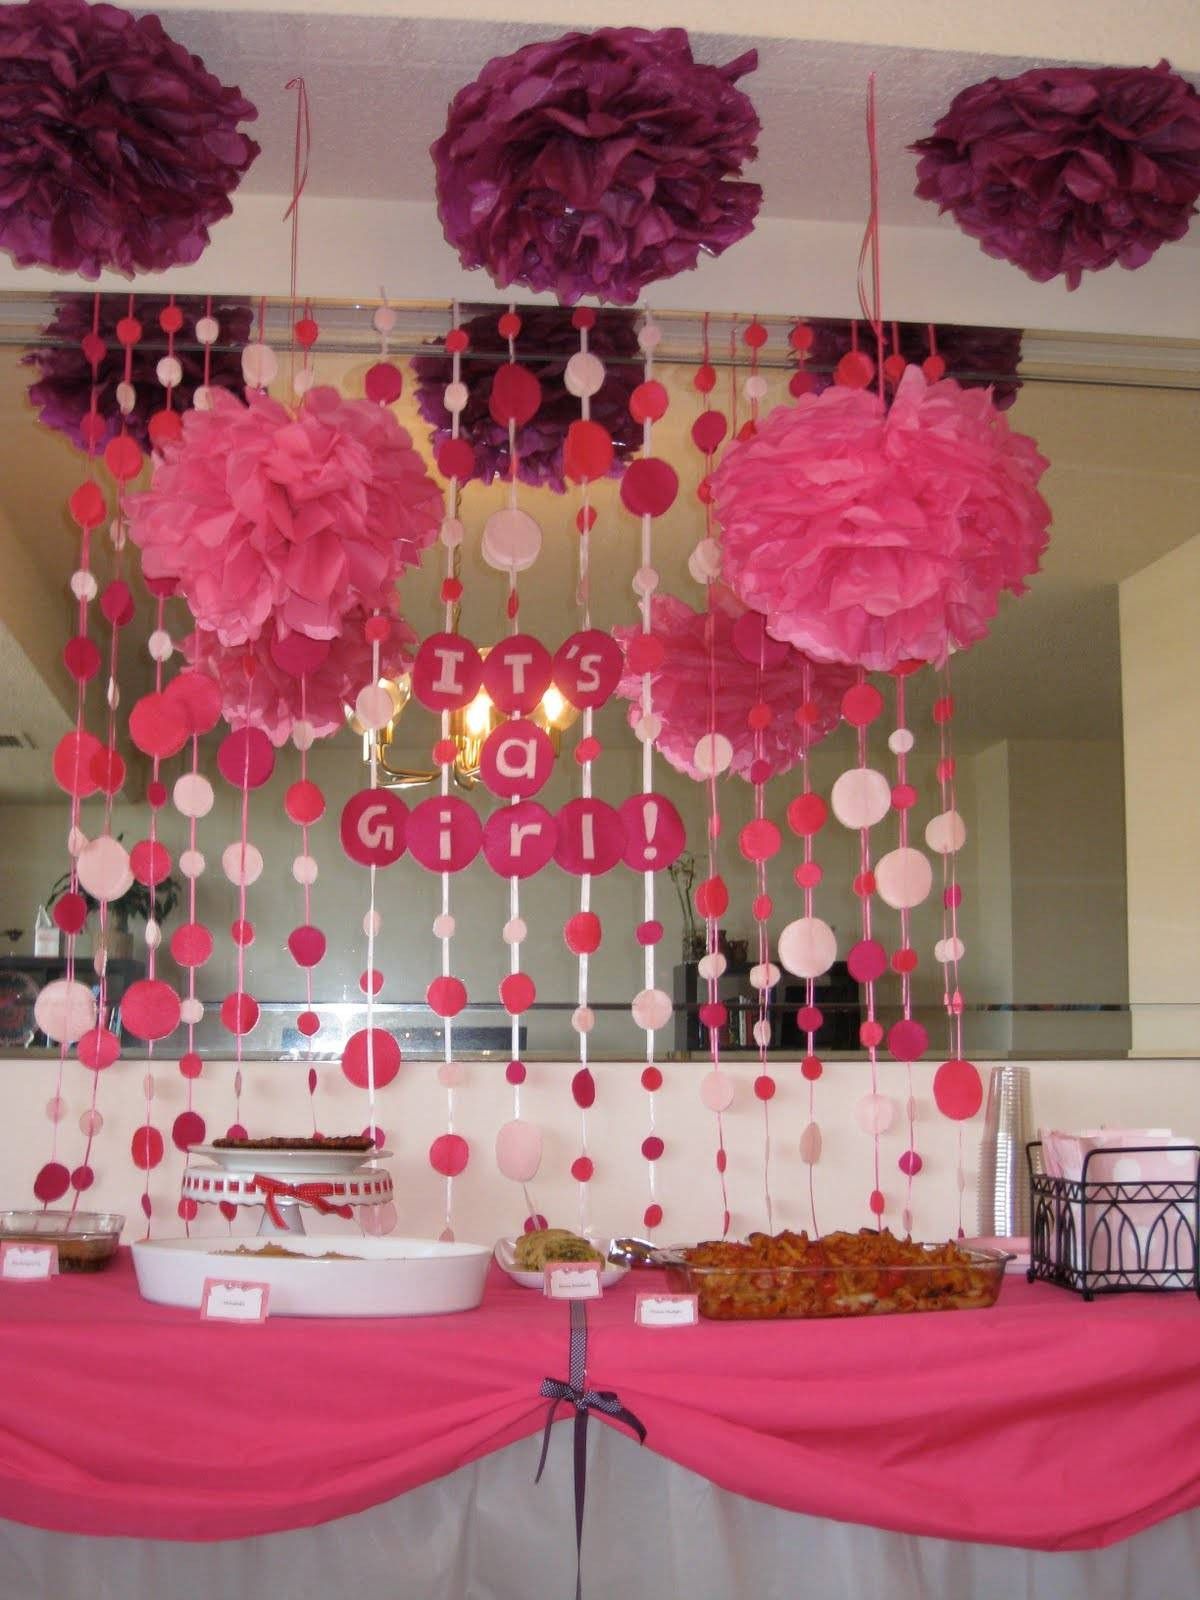 Decor Ideas For Baby Shower
 Creative Baby Shower Decorating Ideas